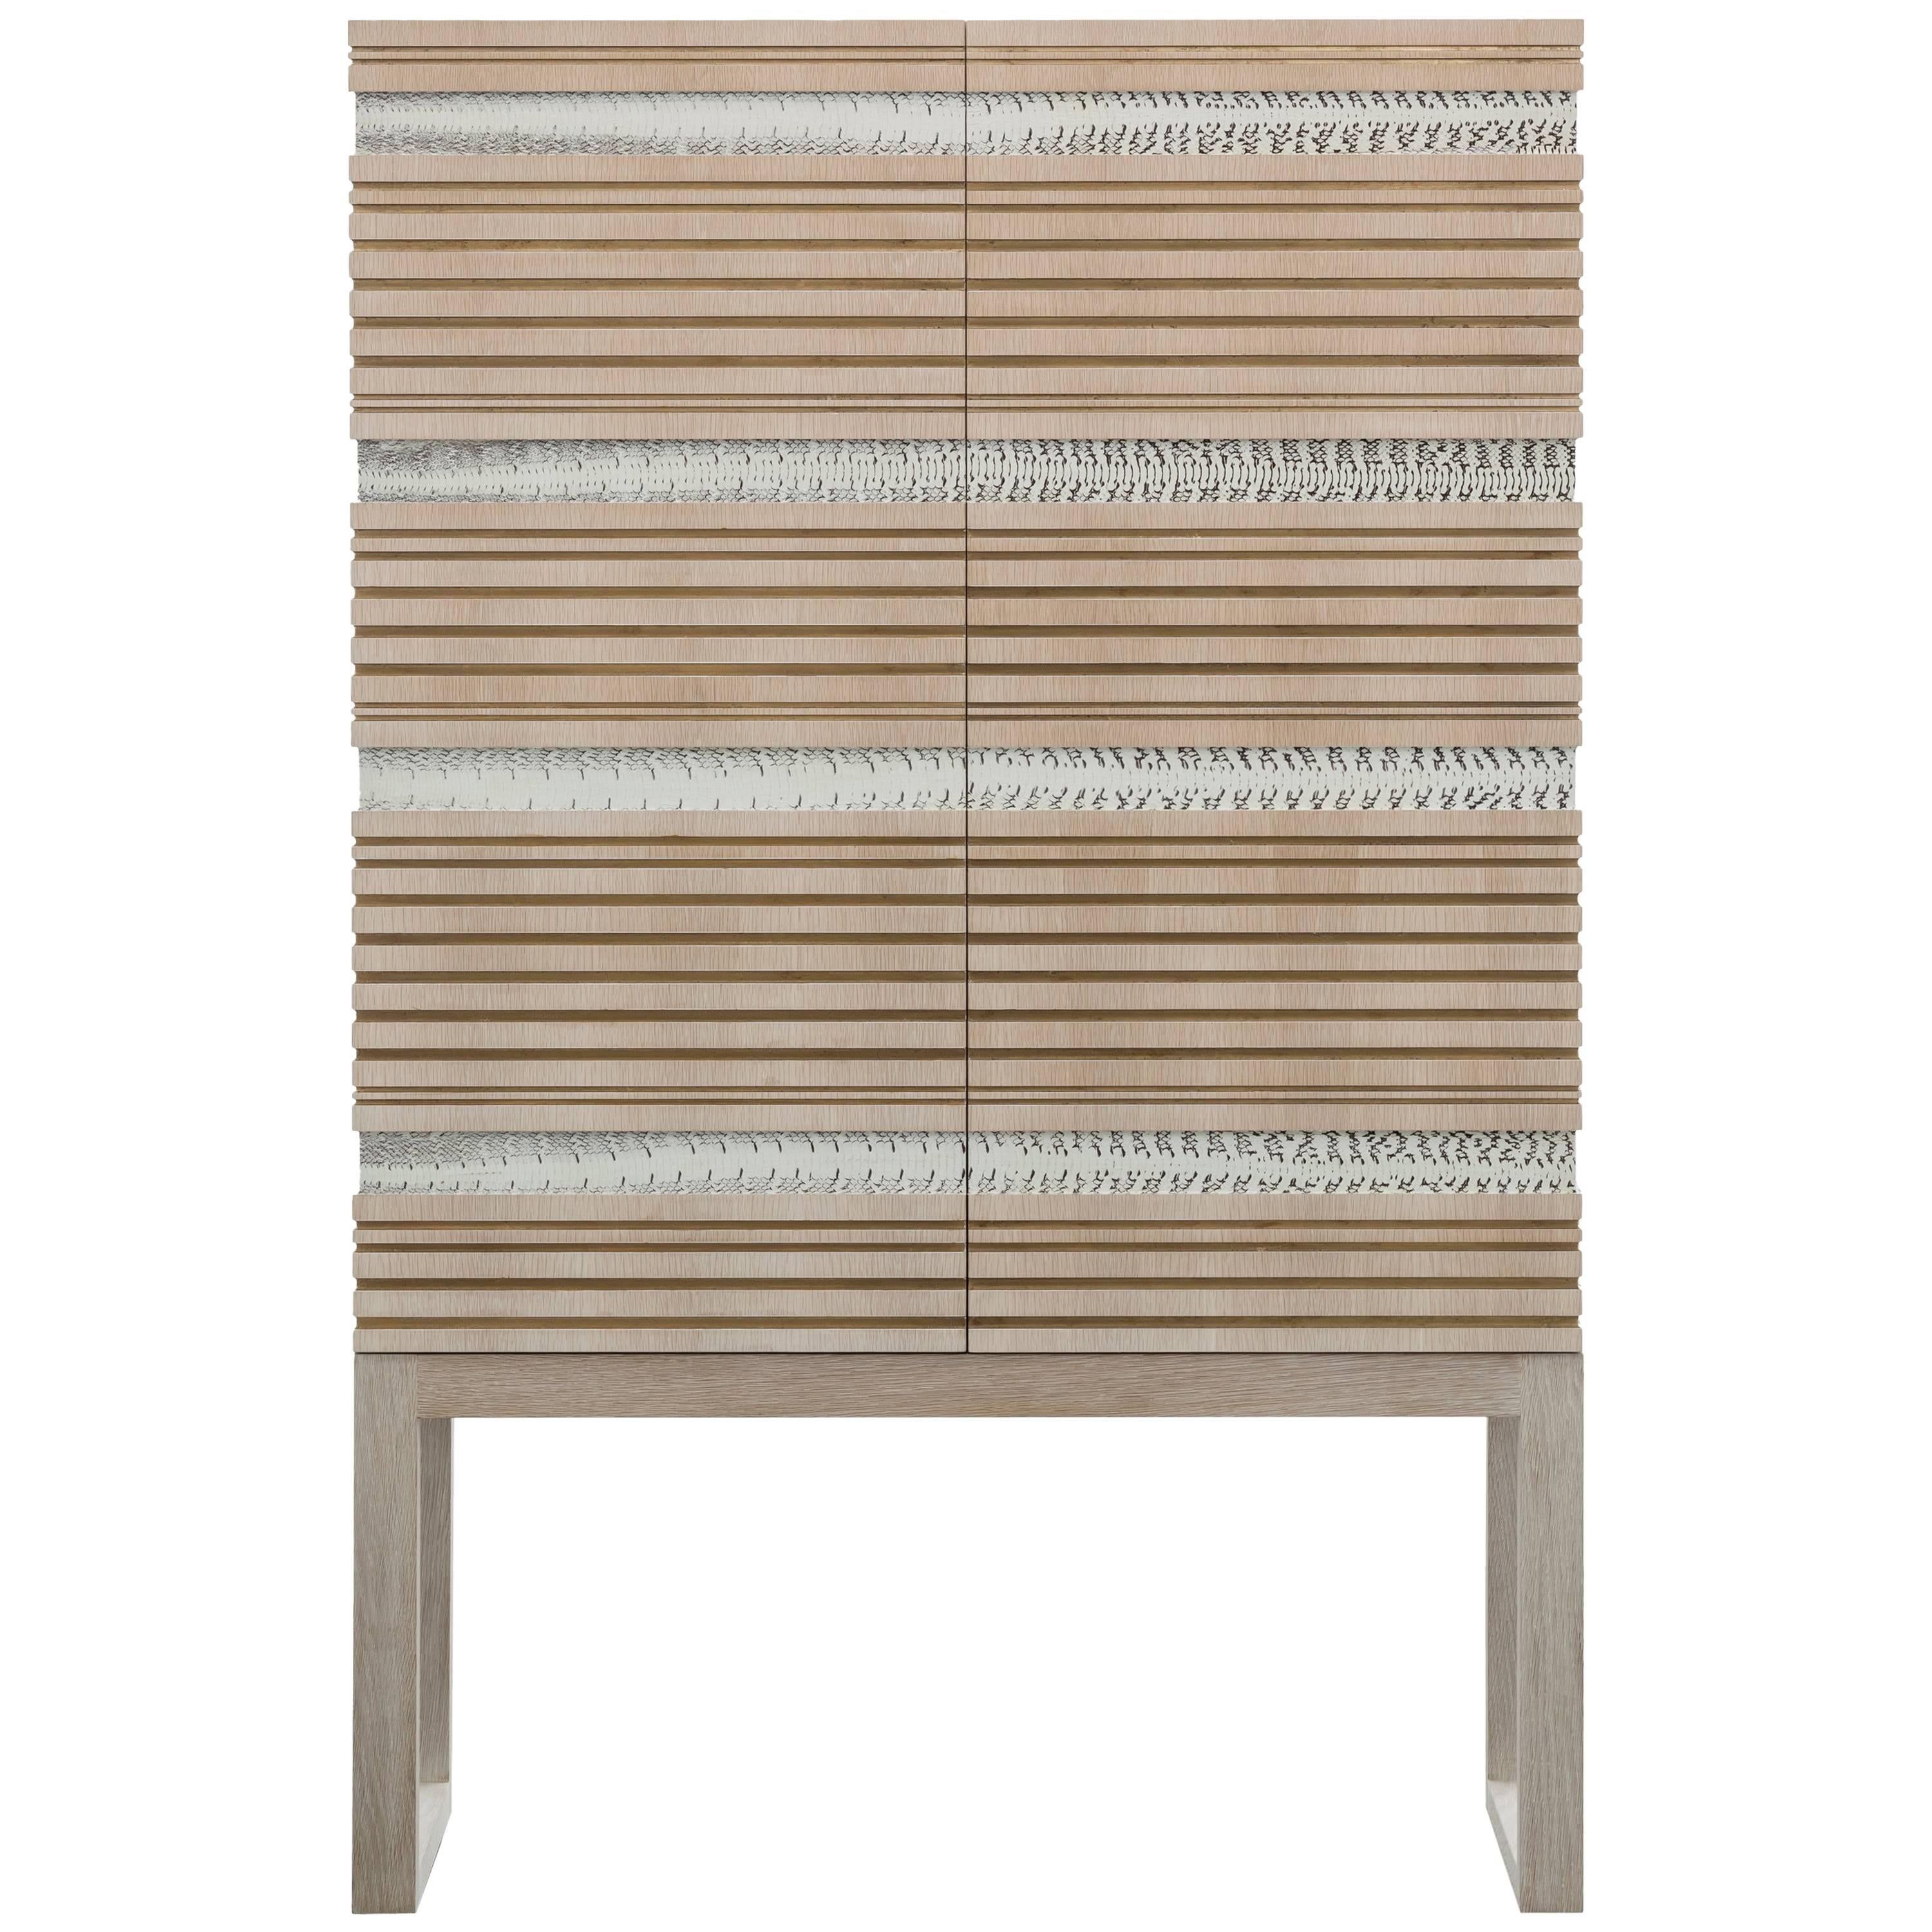 SIMONE CABINET - Modern Oak Armoire with Authentic Snakeskin